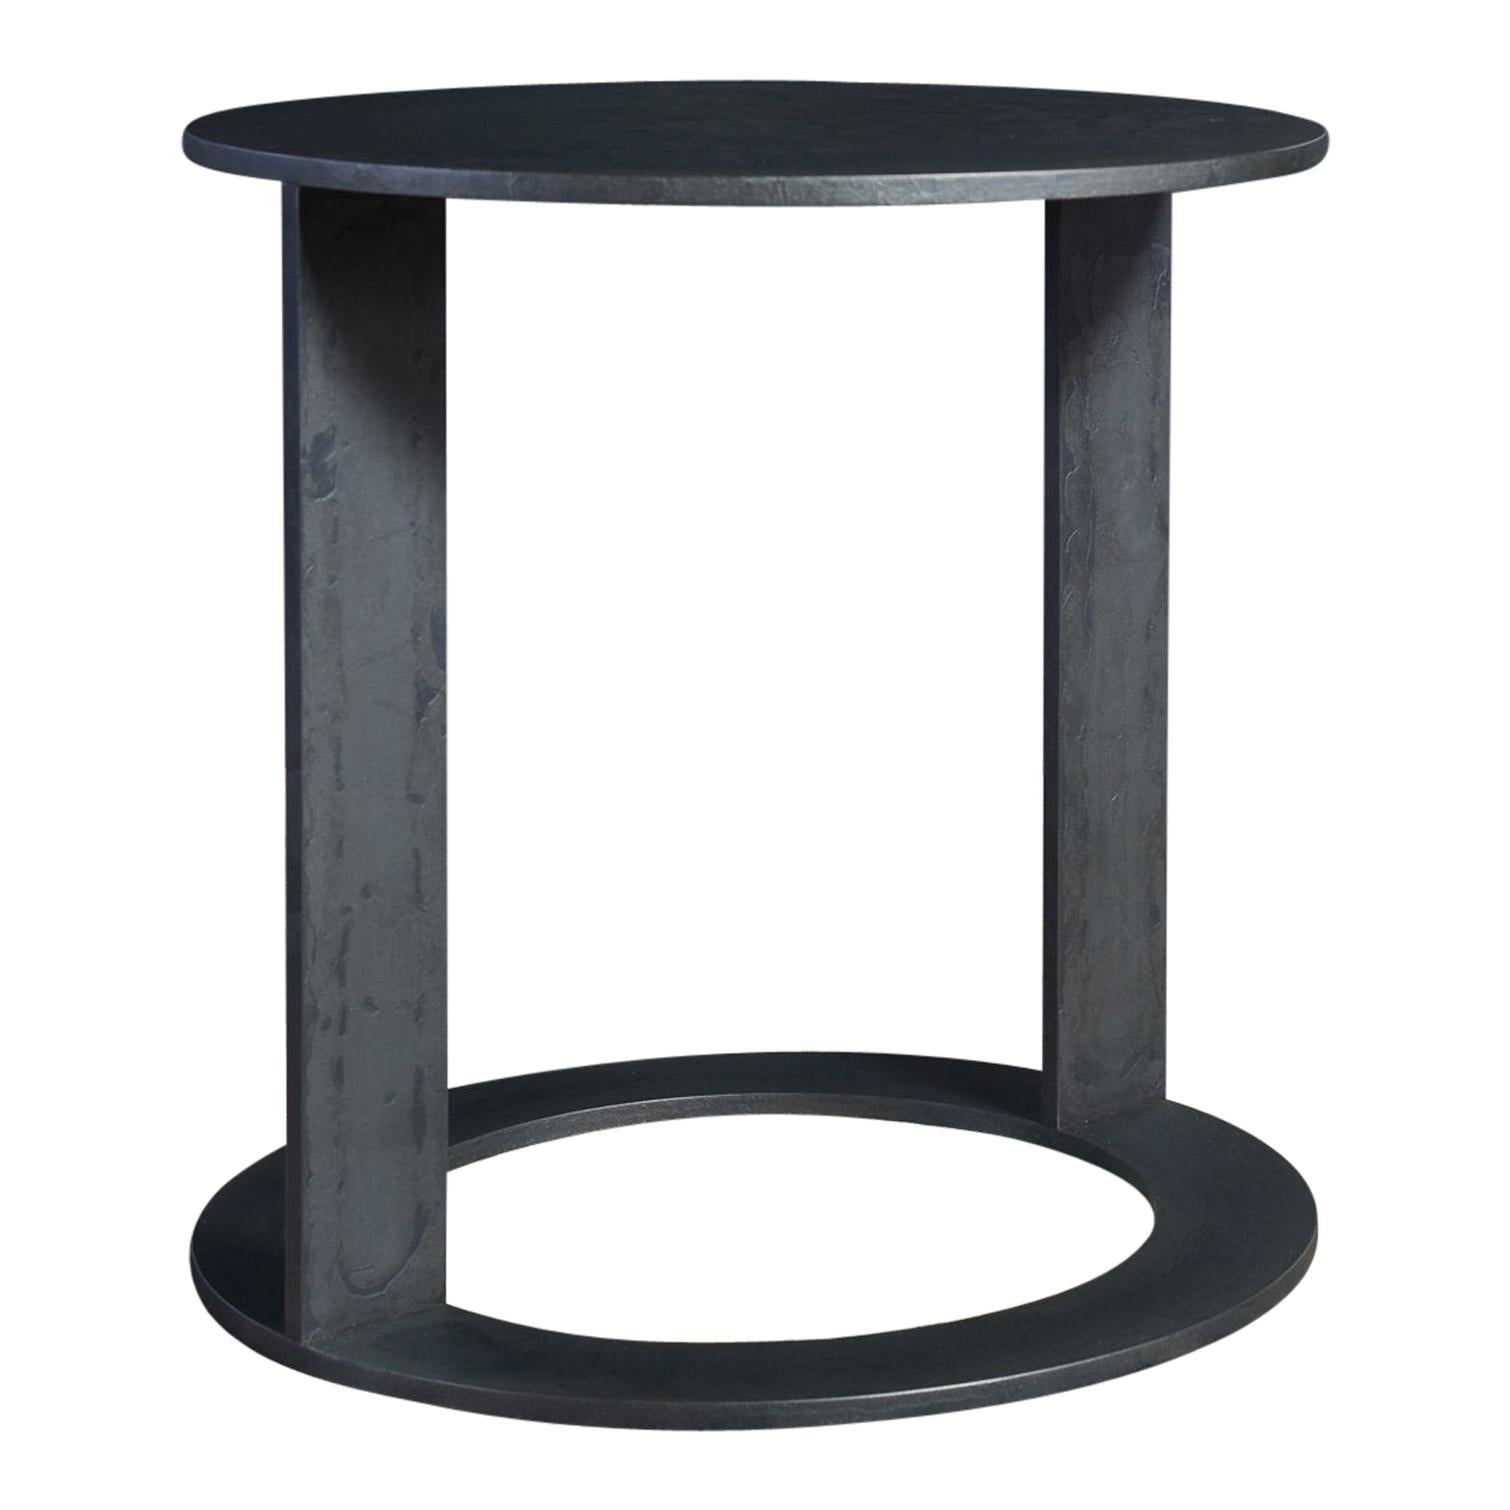 LUMA Design Workshop Block Occasional Table in Black Shale Metal Pitting Texture For Sale